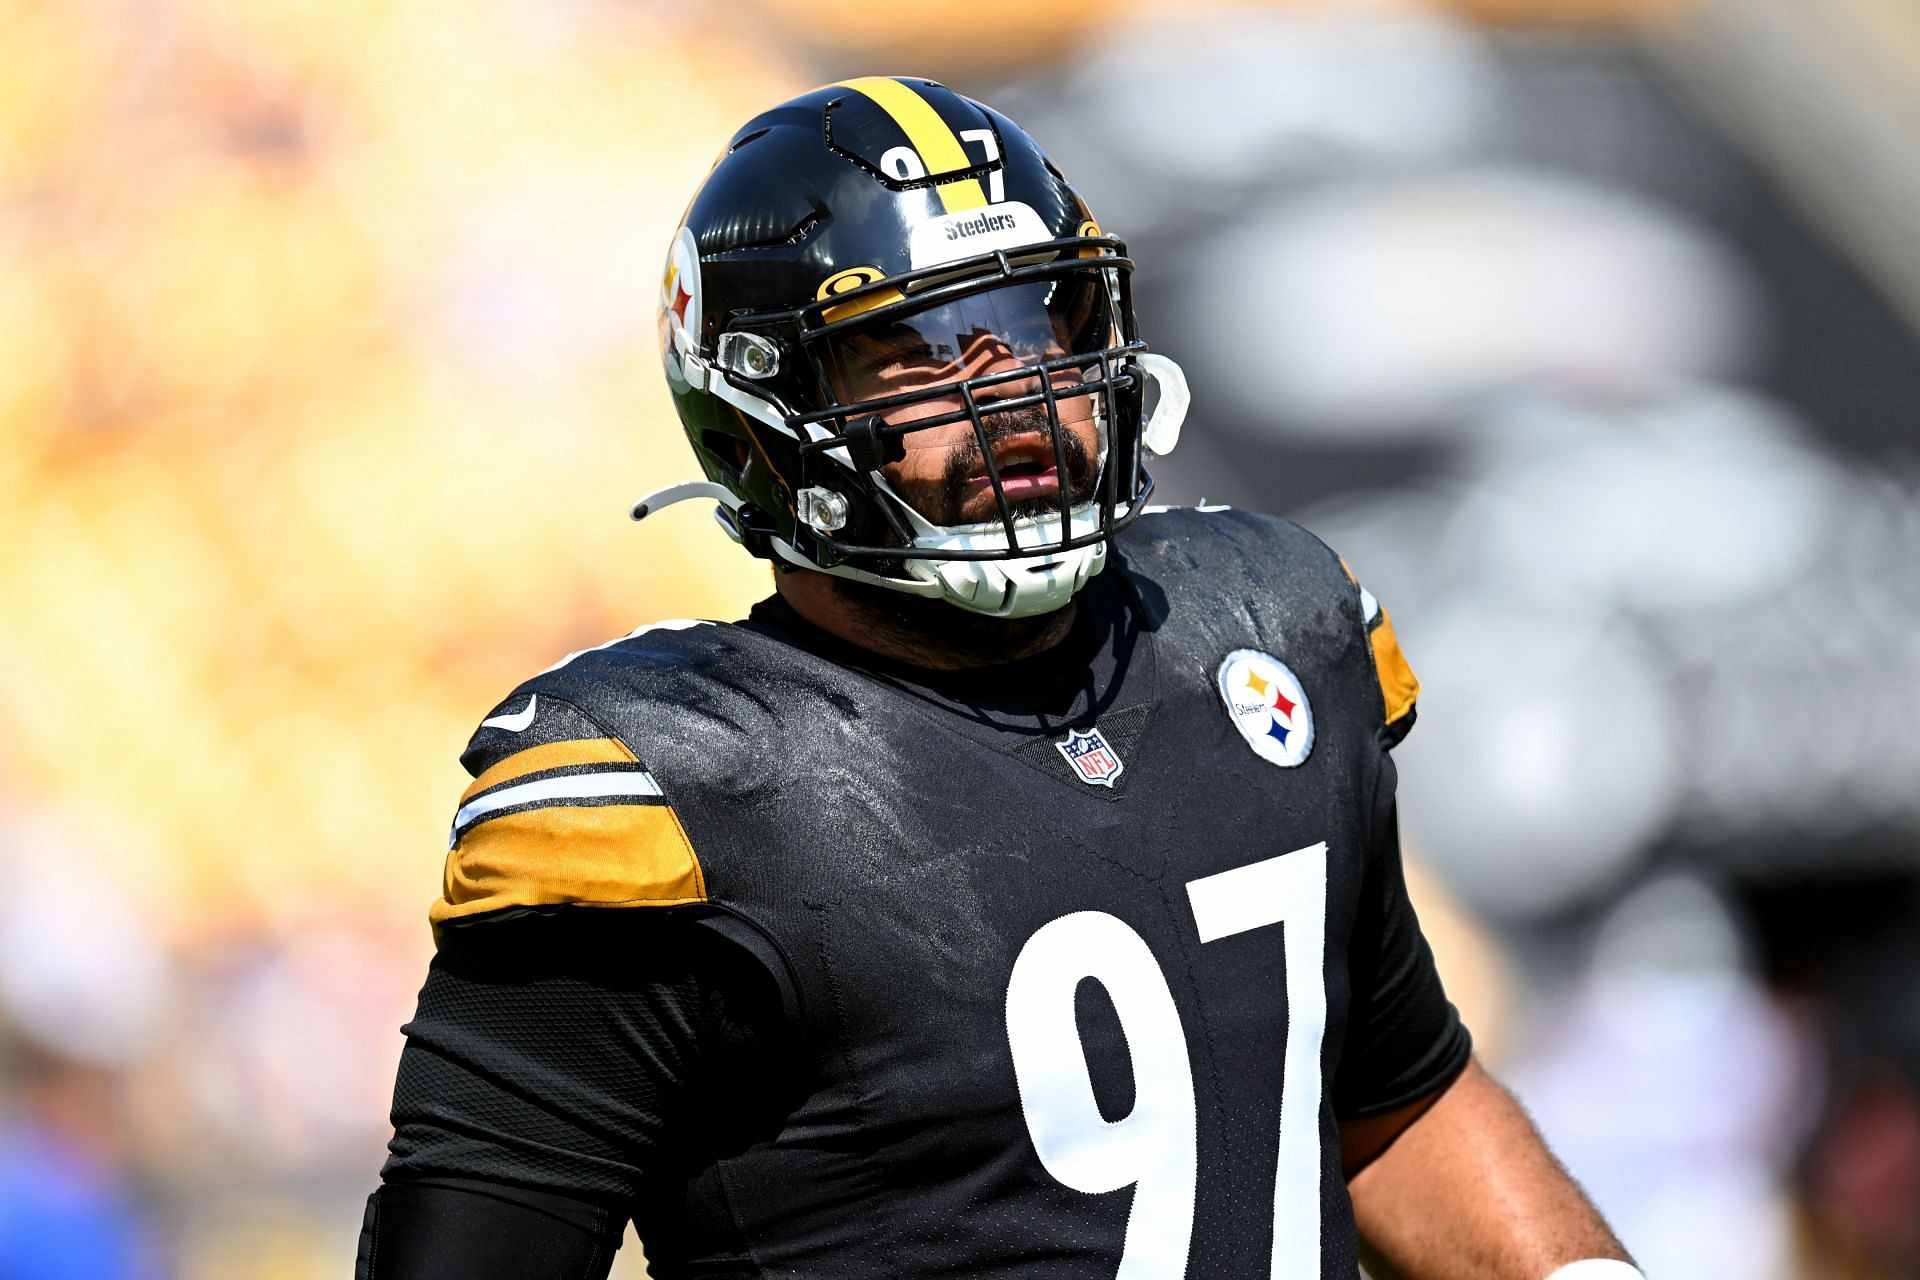 Pittsburgh Steelers DT Cameron Heyward just missed out on a top spot in the top 10 NFL players from Ohio State